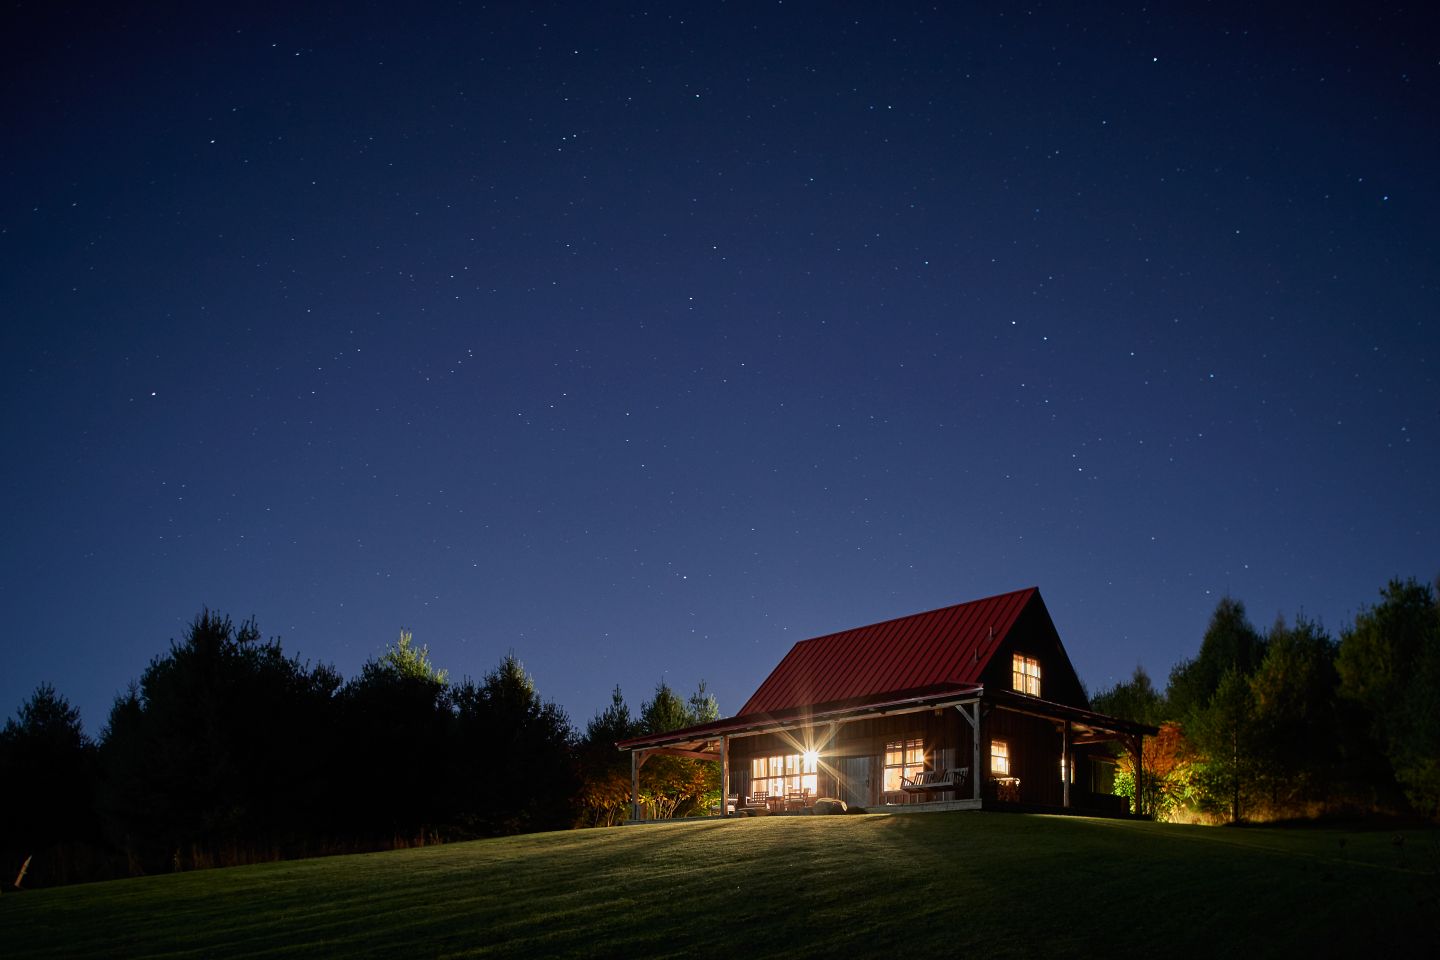 A clear night sky with the Sandhill Cabin lit up in the distance